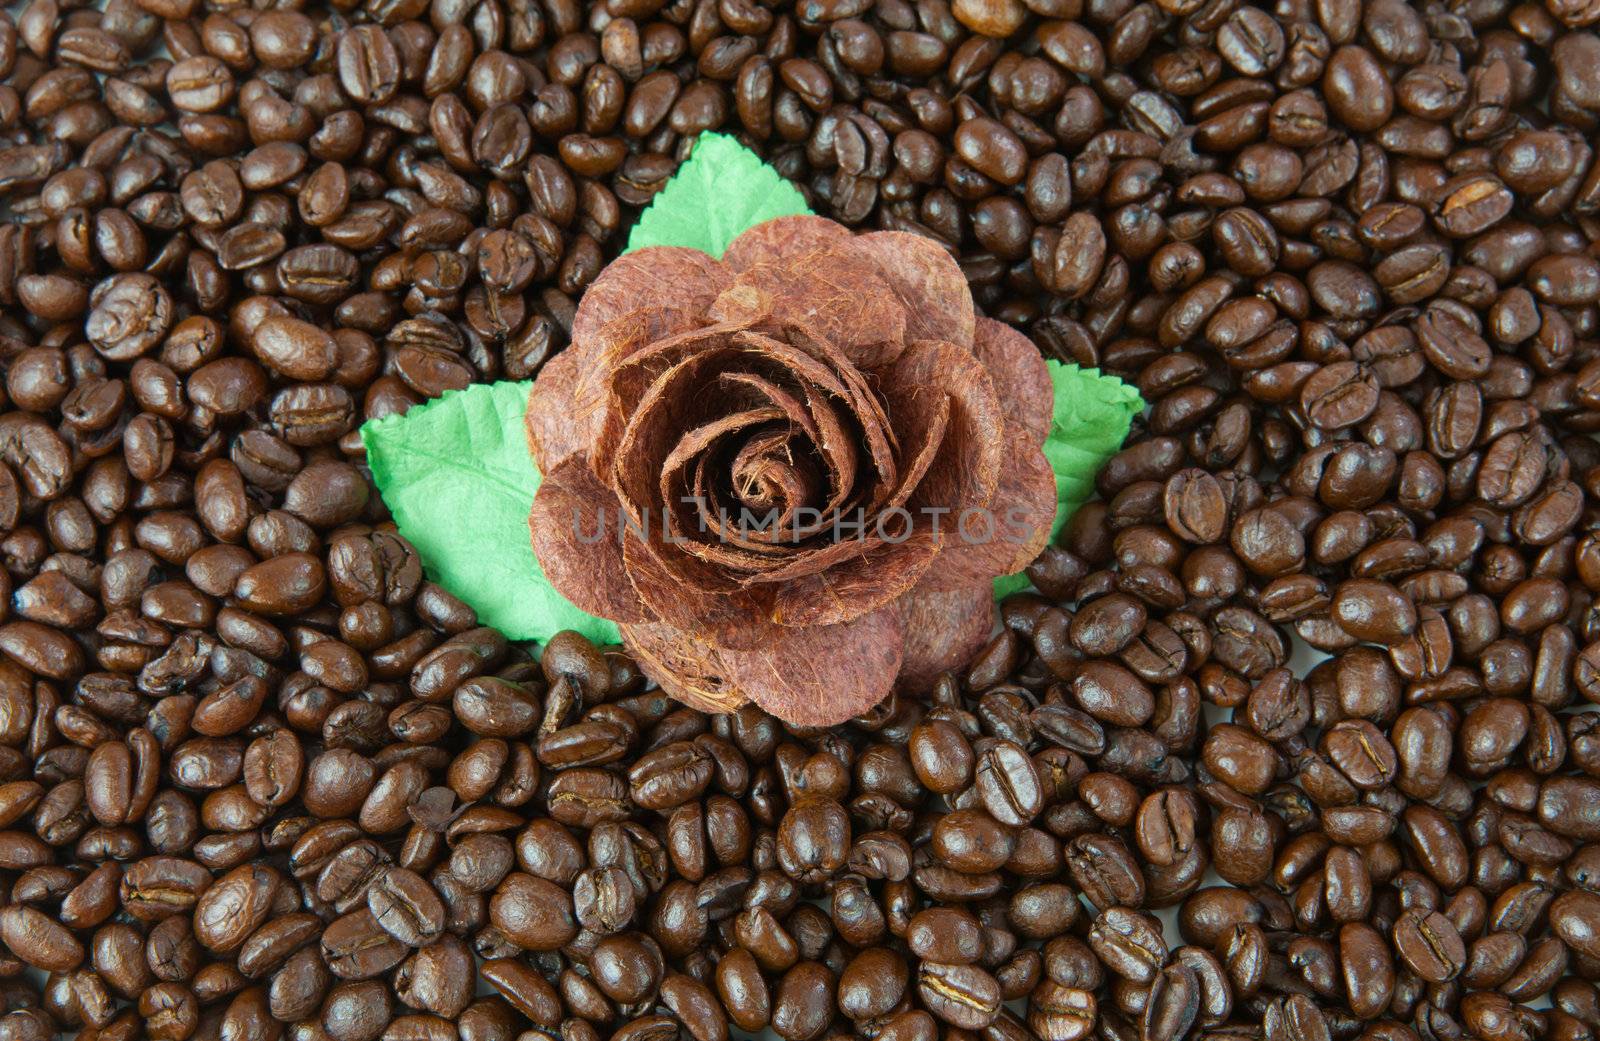 flower and cup on coffee beans